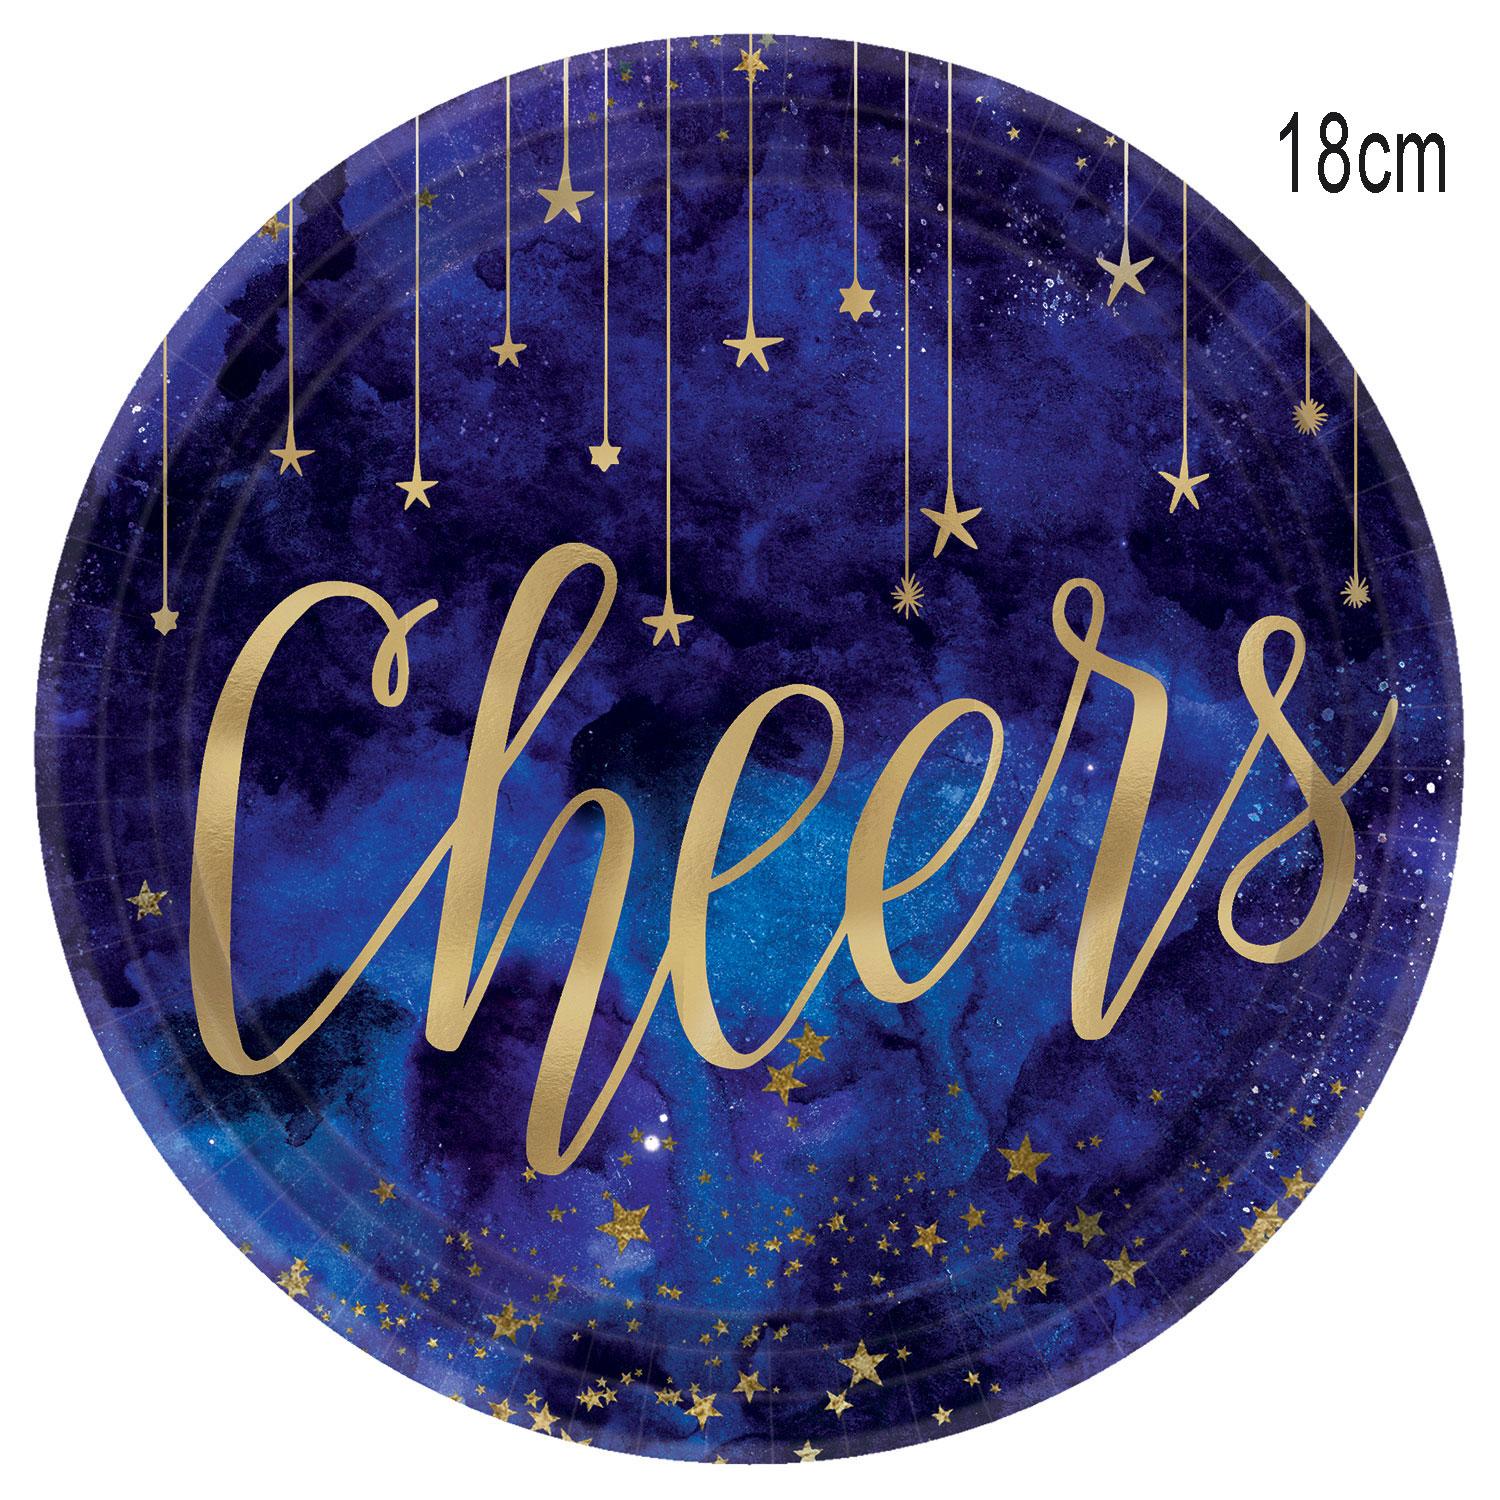 Midnight NYE Metallic Paper Plates 18cm pk8 by Amscan 542207 available here at Karnival Costumes online party shop.